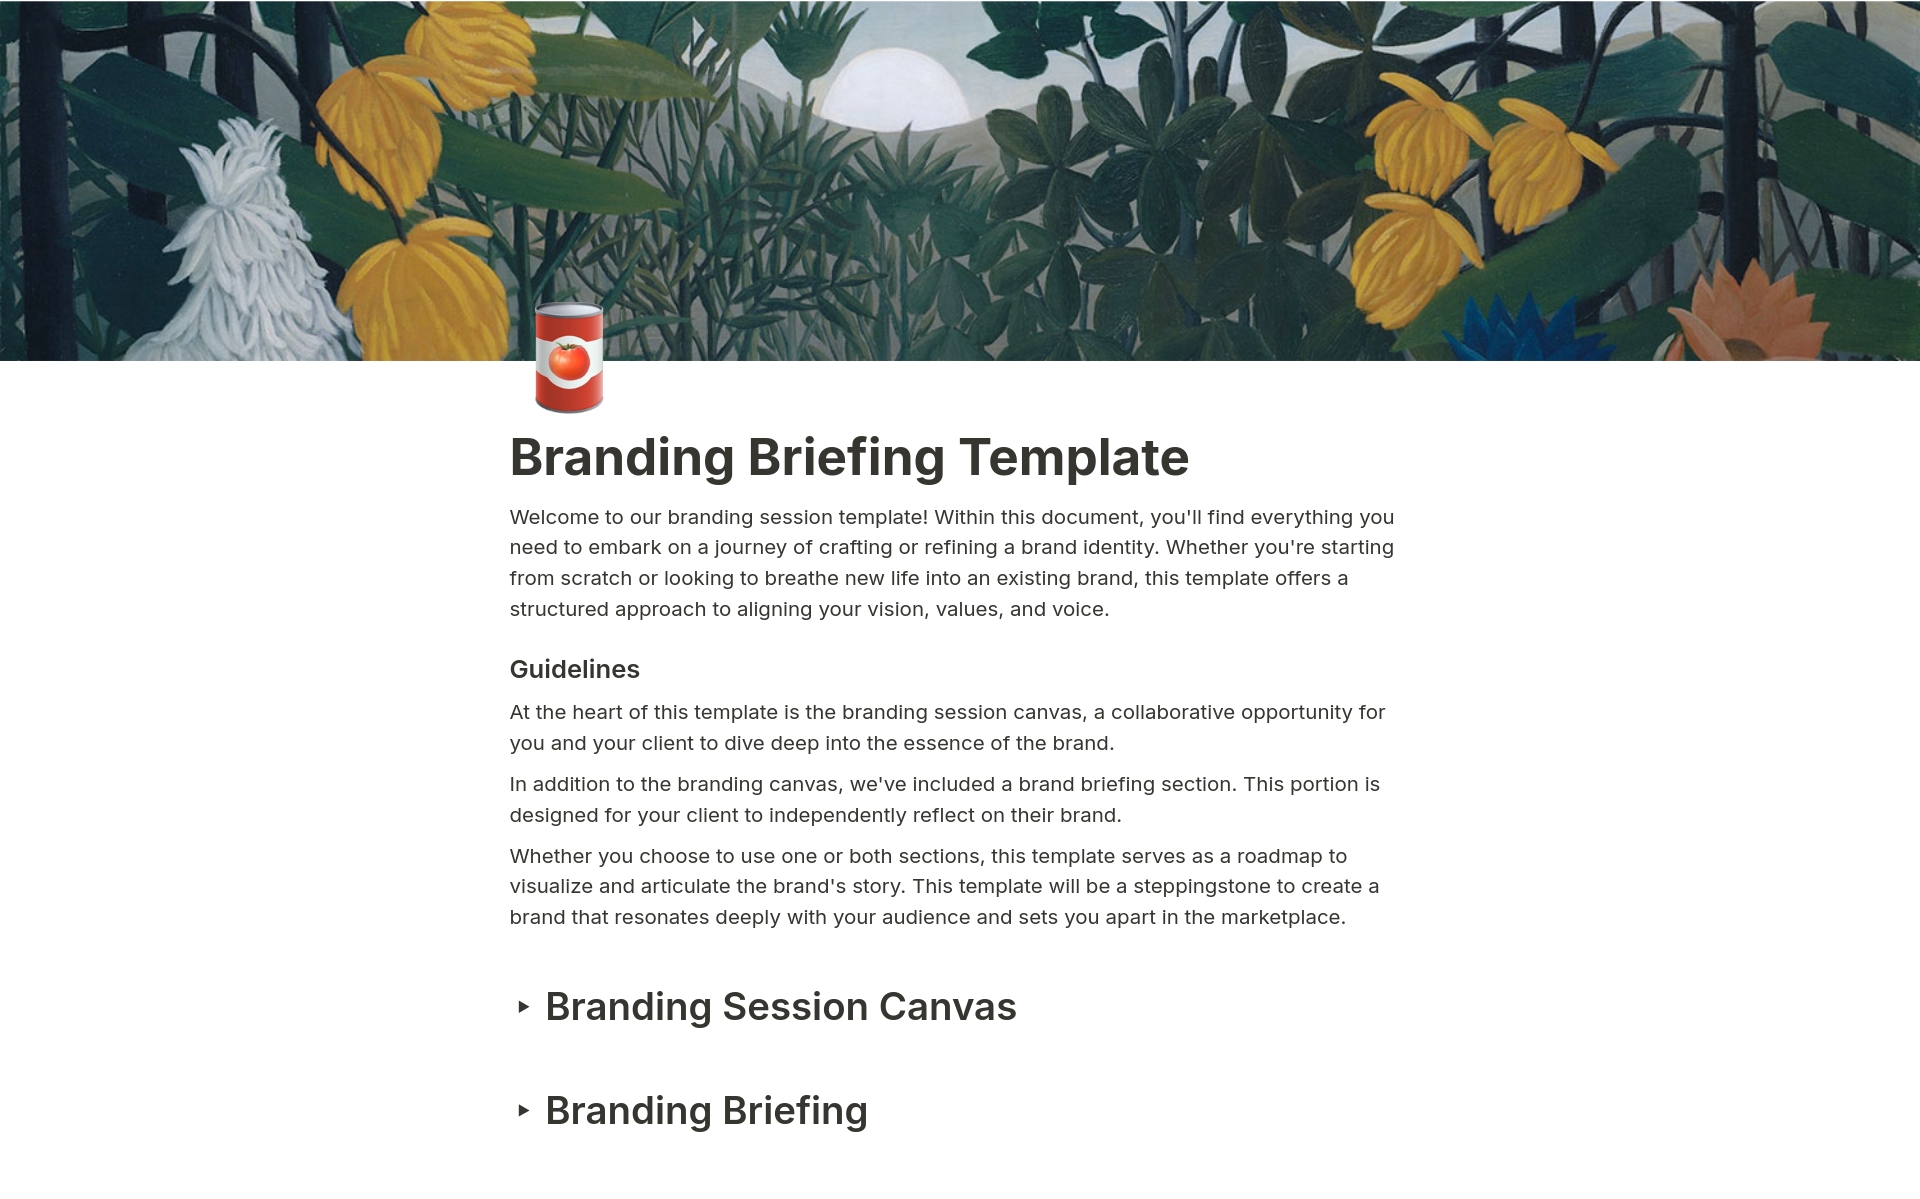 A template preview for Branding Session Canvas & Briefing questions